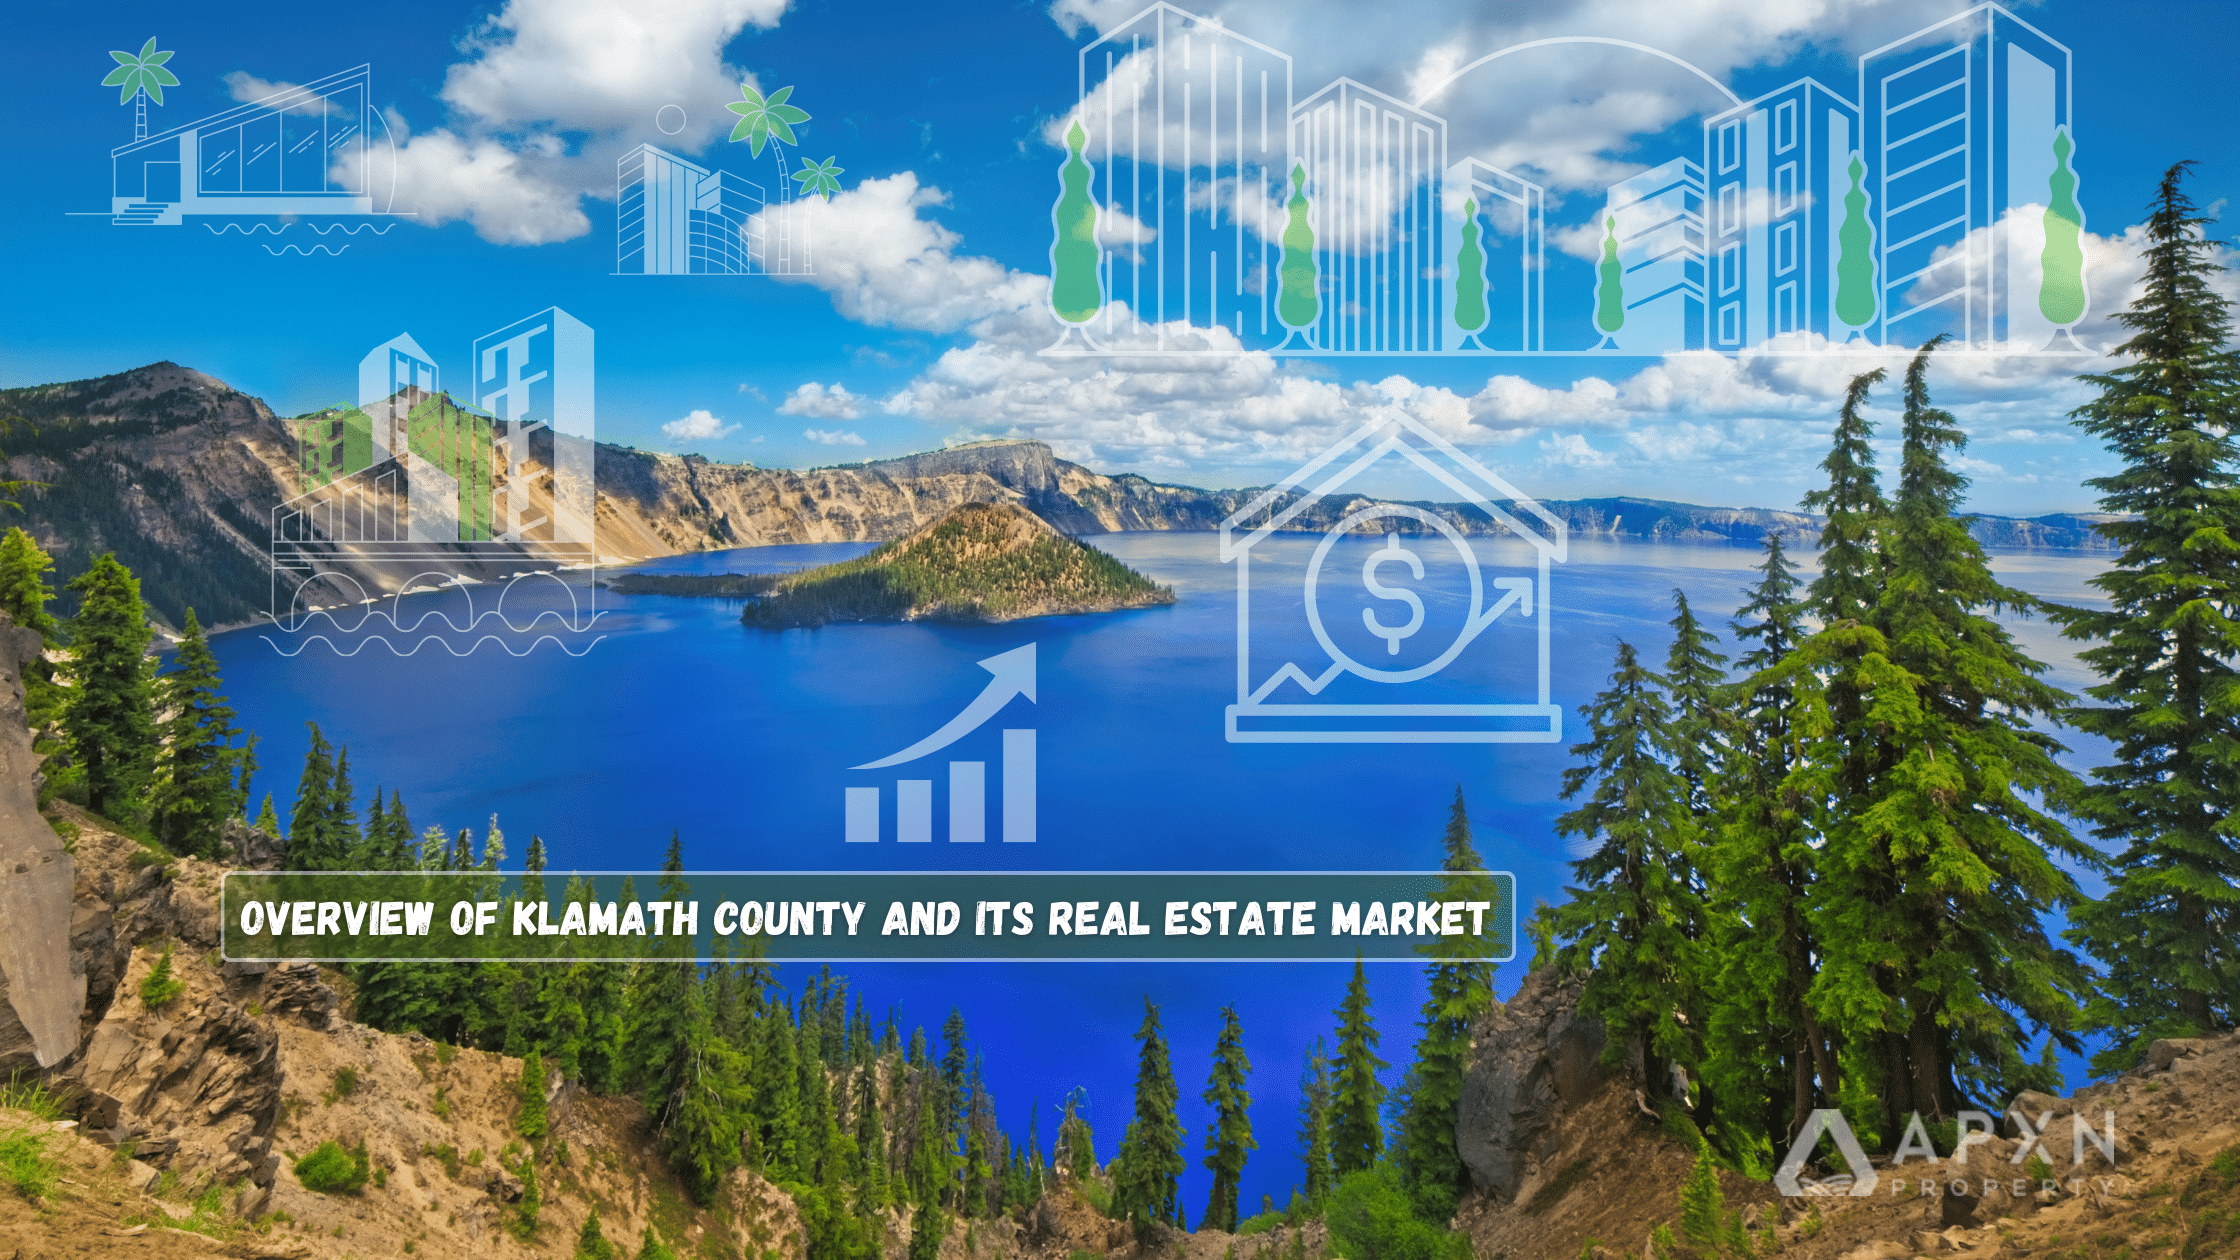 Overview of Klamath County and Its Real Estate Market